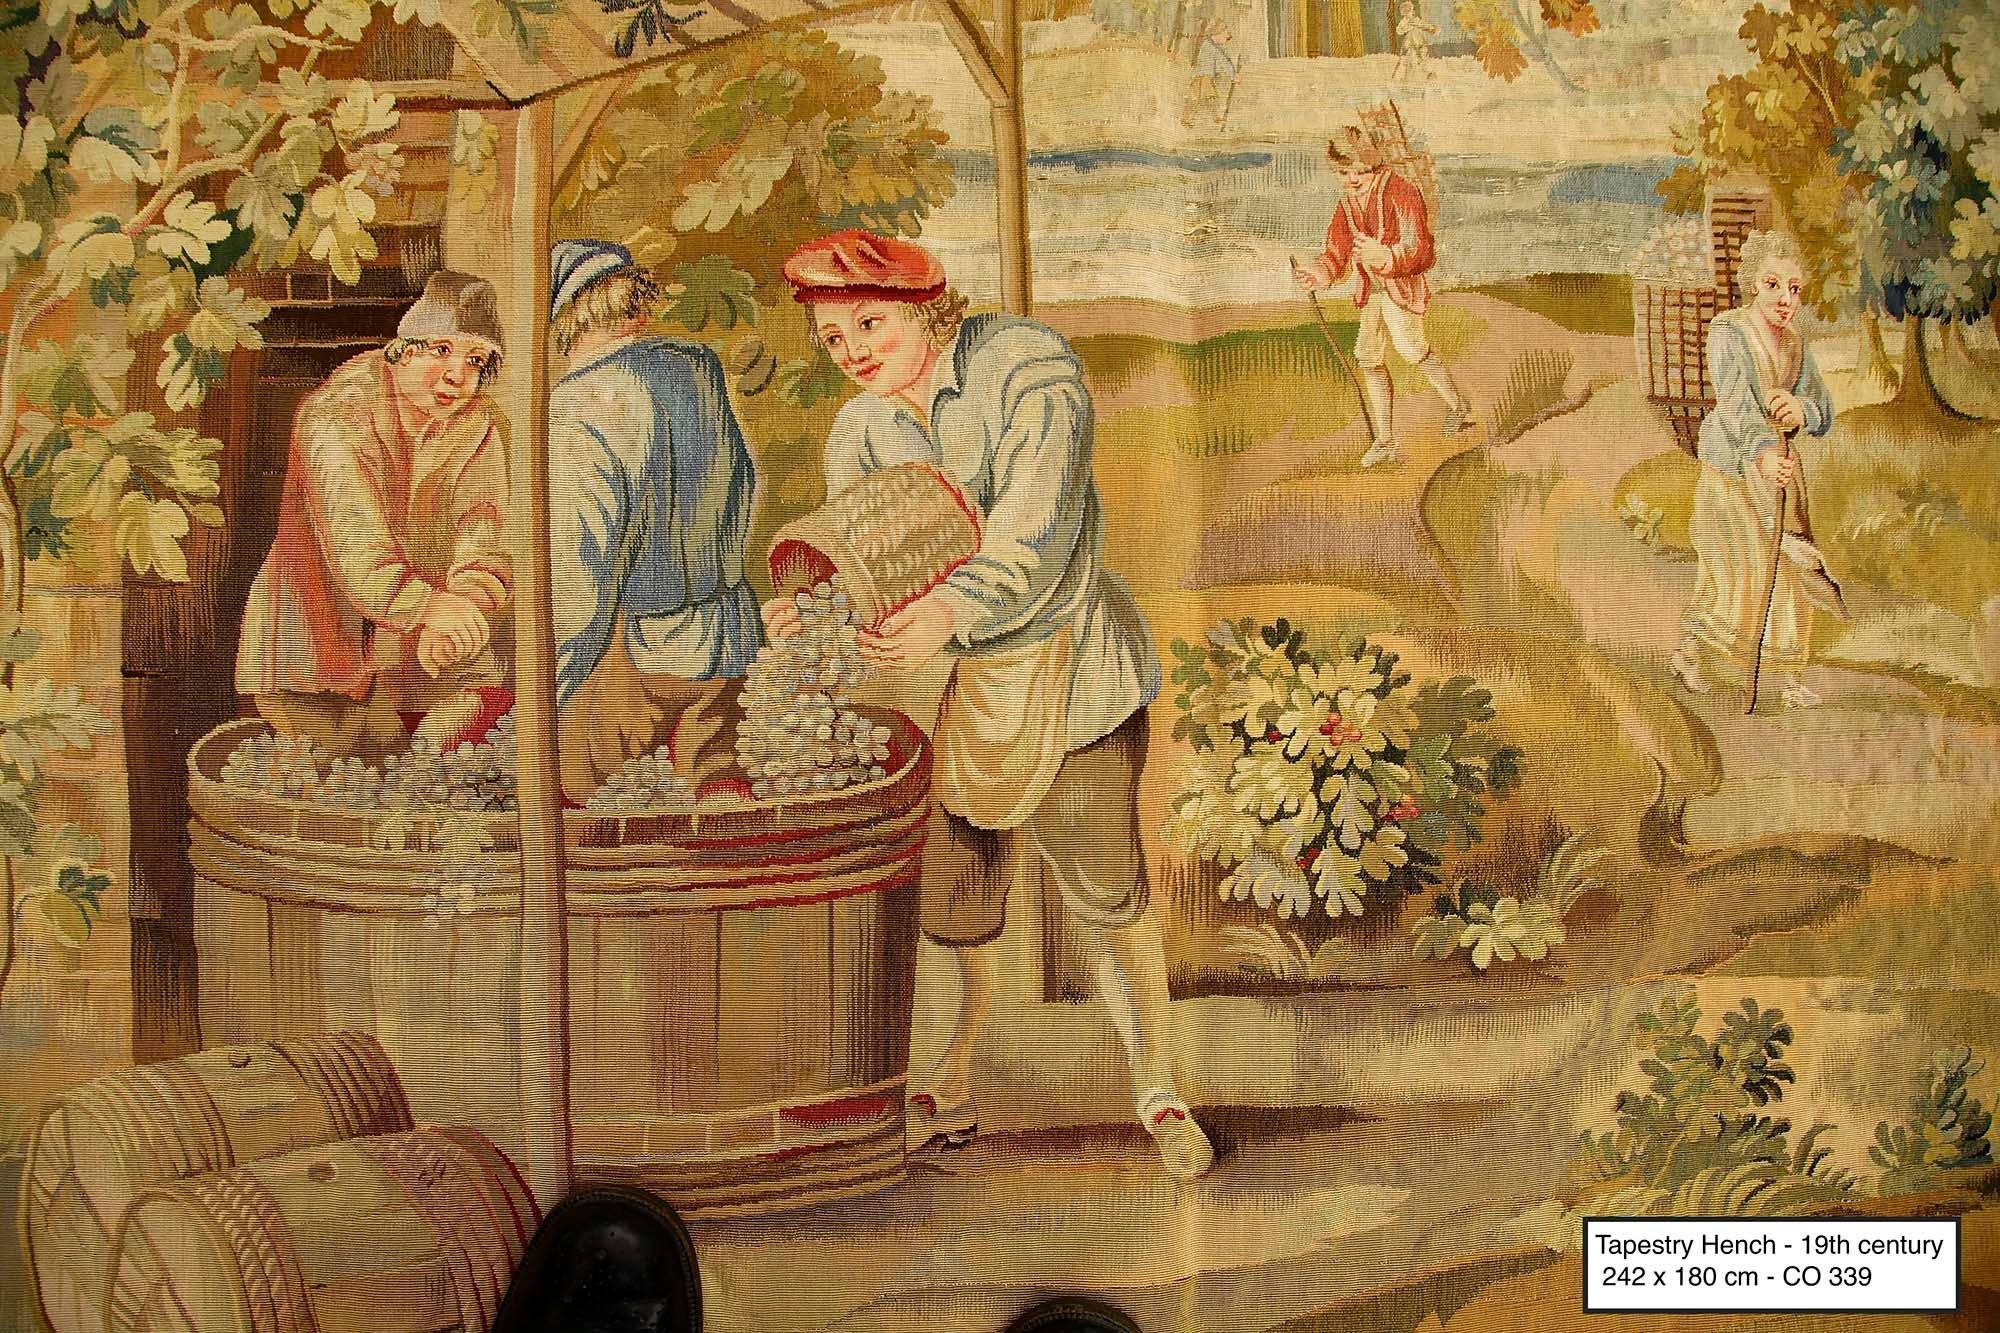 A French tapestry depicting in a bucolic atmosphere the first stage in wine making (gathering the grapes before extracting the juice). The workers, or peasants, bring basketful of white grapes and tumble their contents into a big vat, constructed of